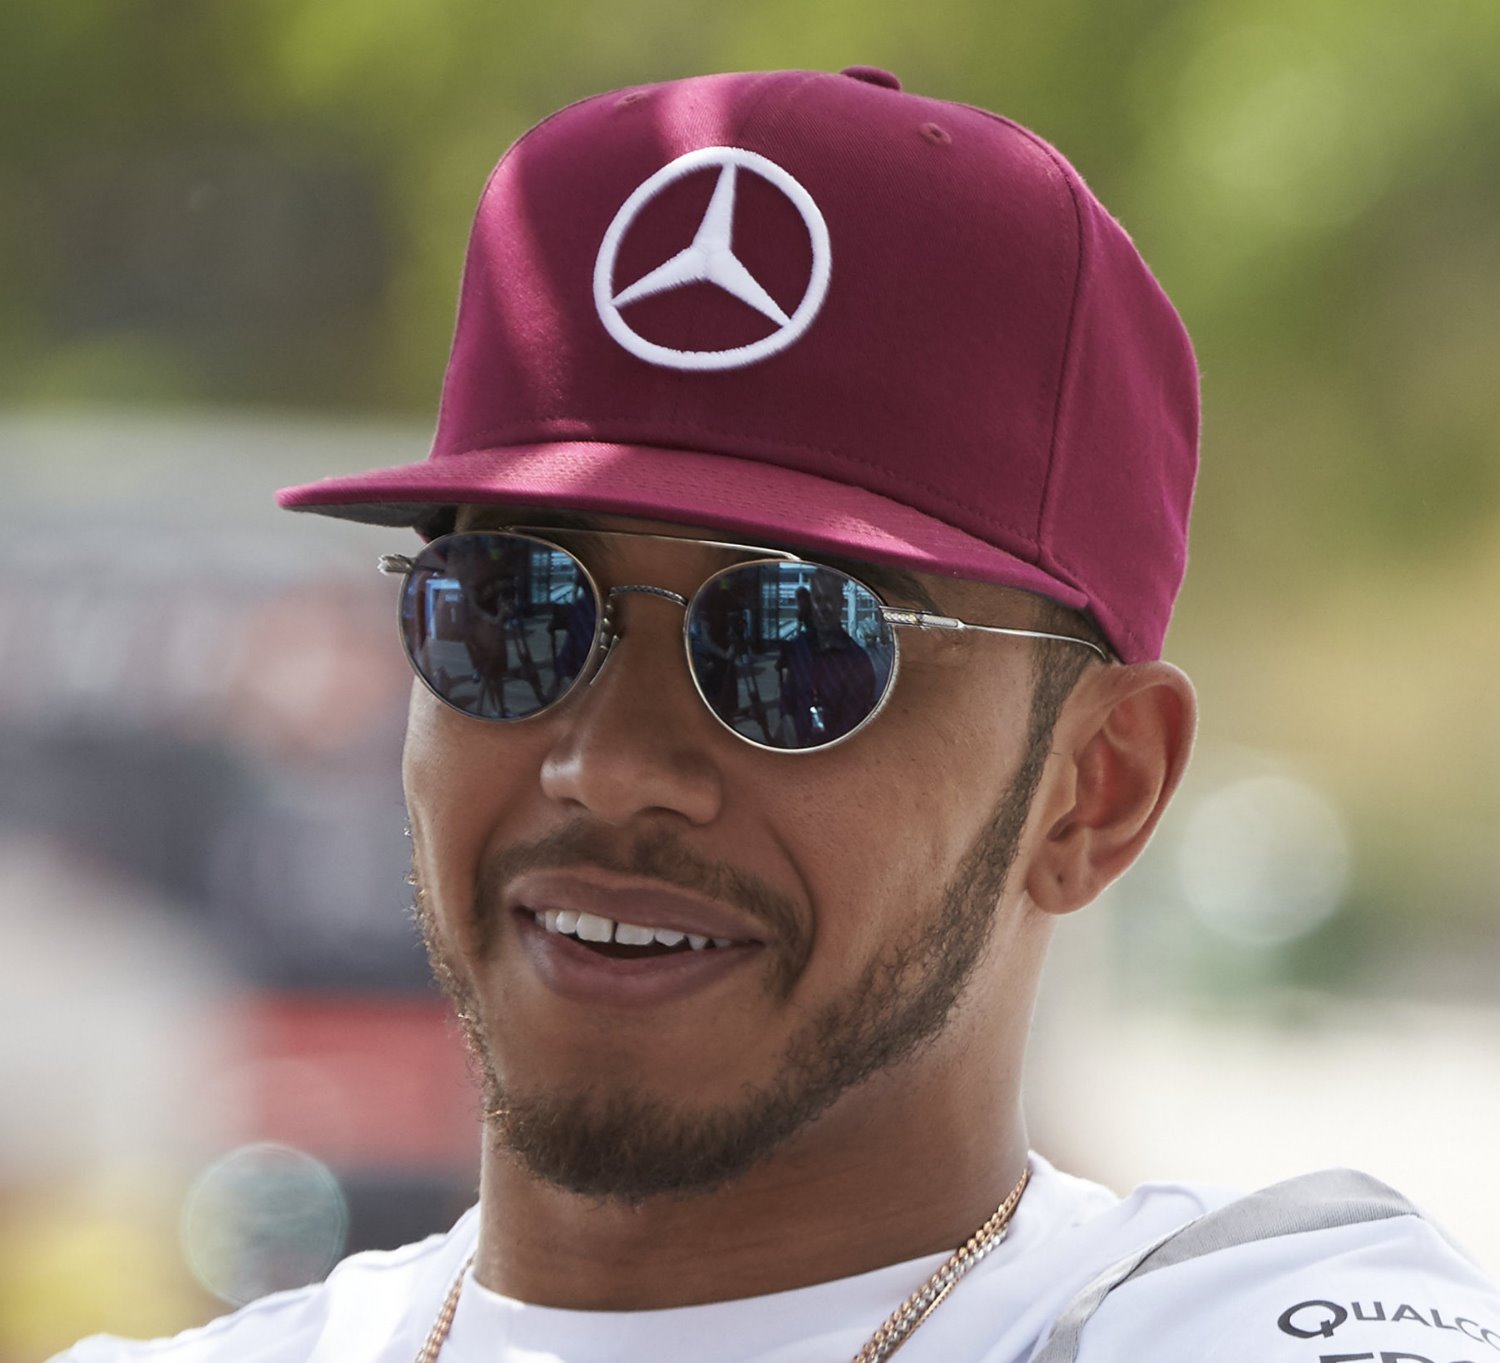 Hamilton realizing that Mercedes as preordained Rosberg as the 2016 F1 champion. Not only is his car more reliable, he's faster. It all comes down to the commands the Mercedes engineers beam to the car